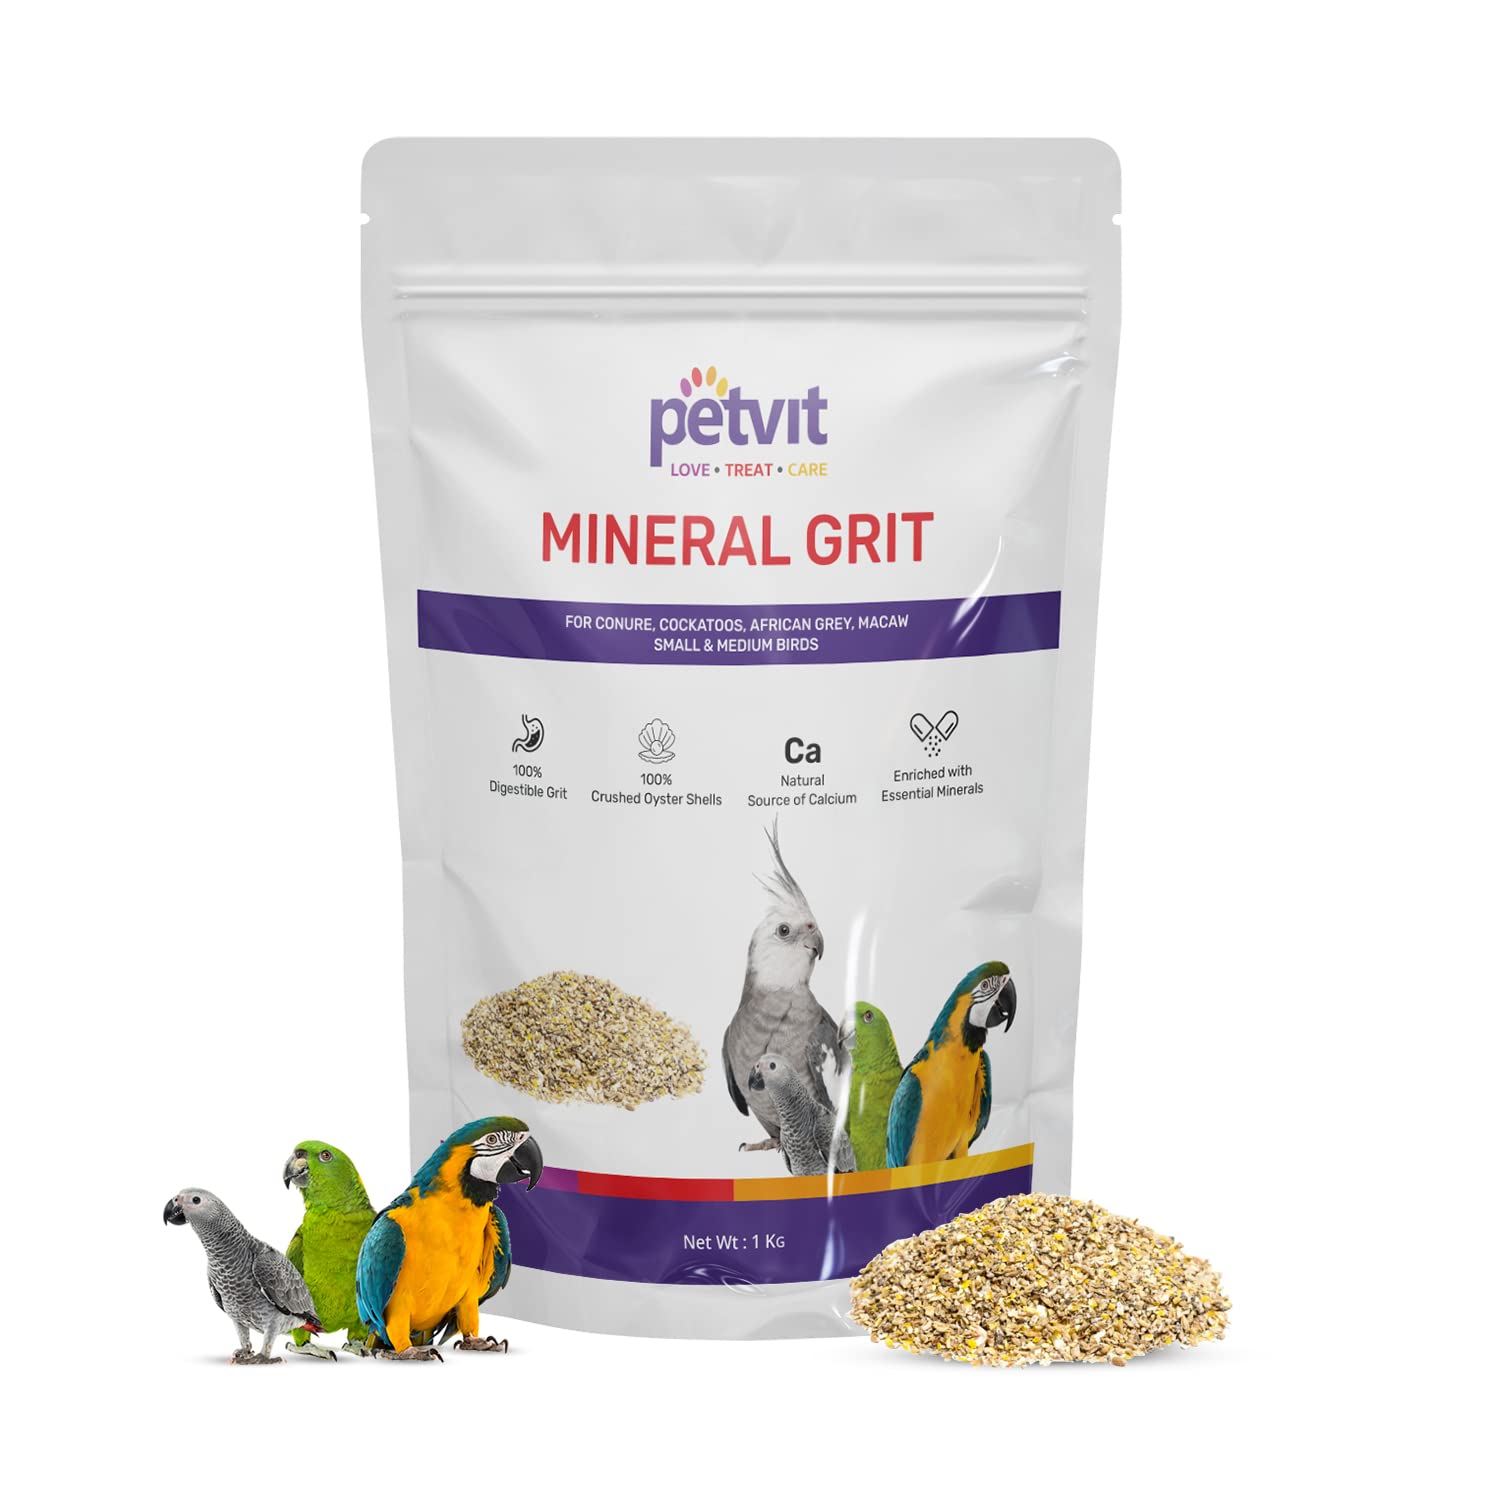 Petvit Mineral Birds Girt with Oyster Shell, Zinc Sulfate, Mineral O | Healthy Bird Digestive System for Conure, Cockatoos, African Grey, Macaw & Other Small & Medium Birds – 1kg